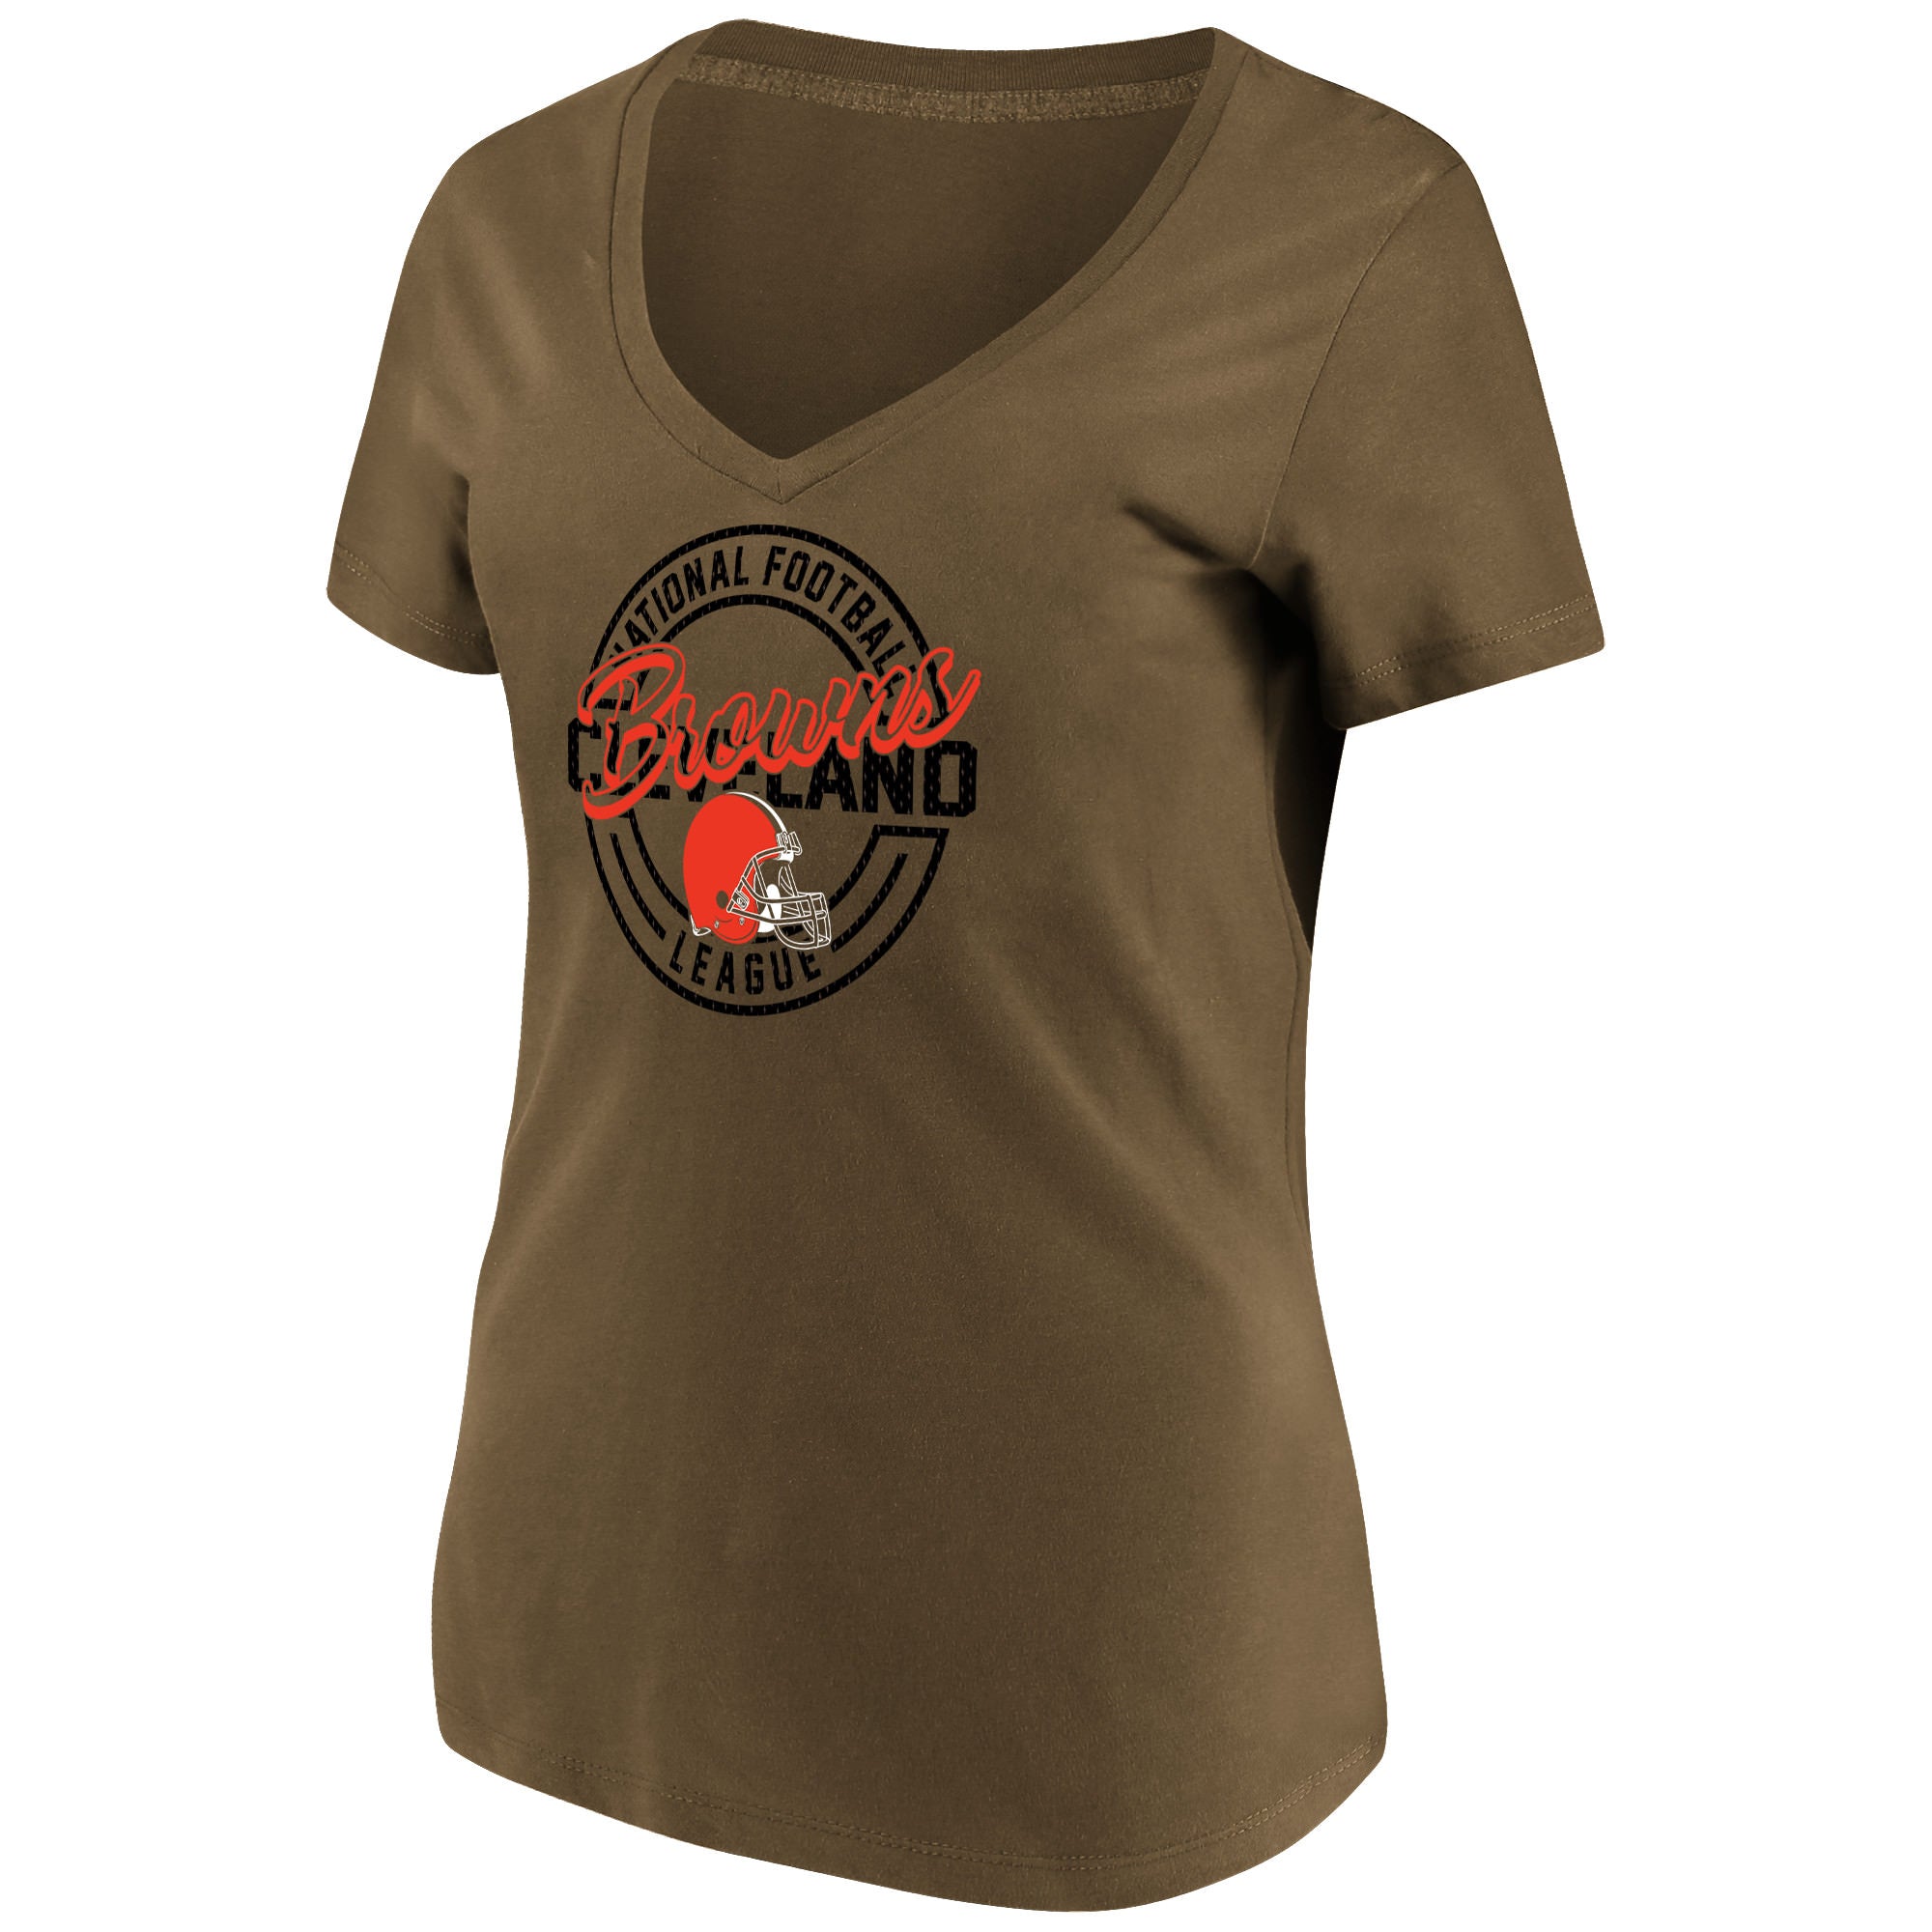 ladies cleveland browns shirts